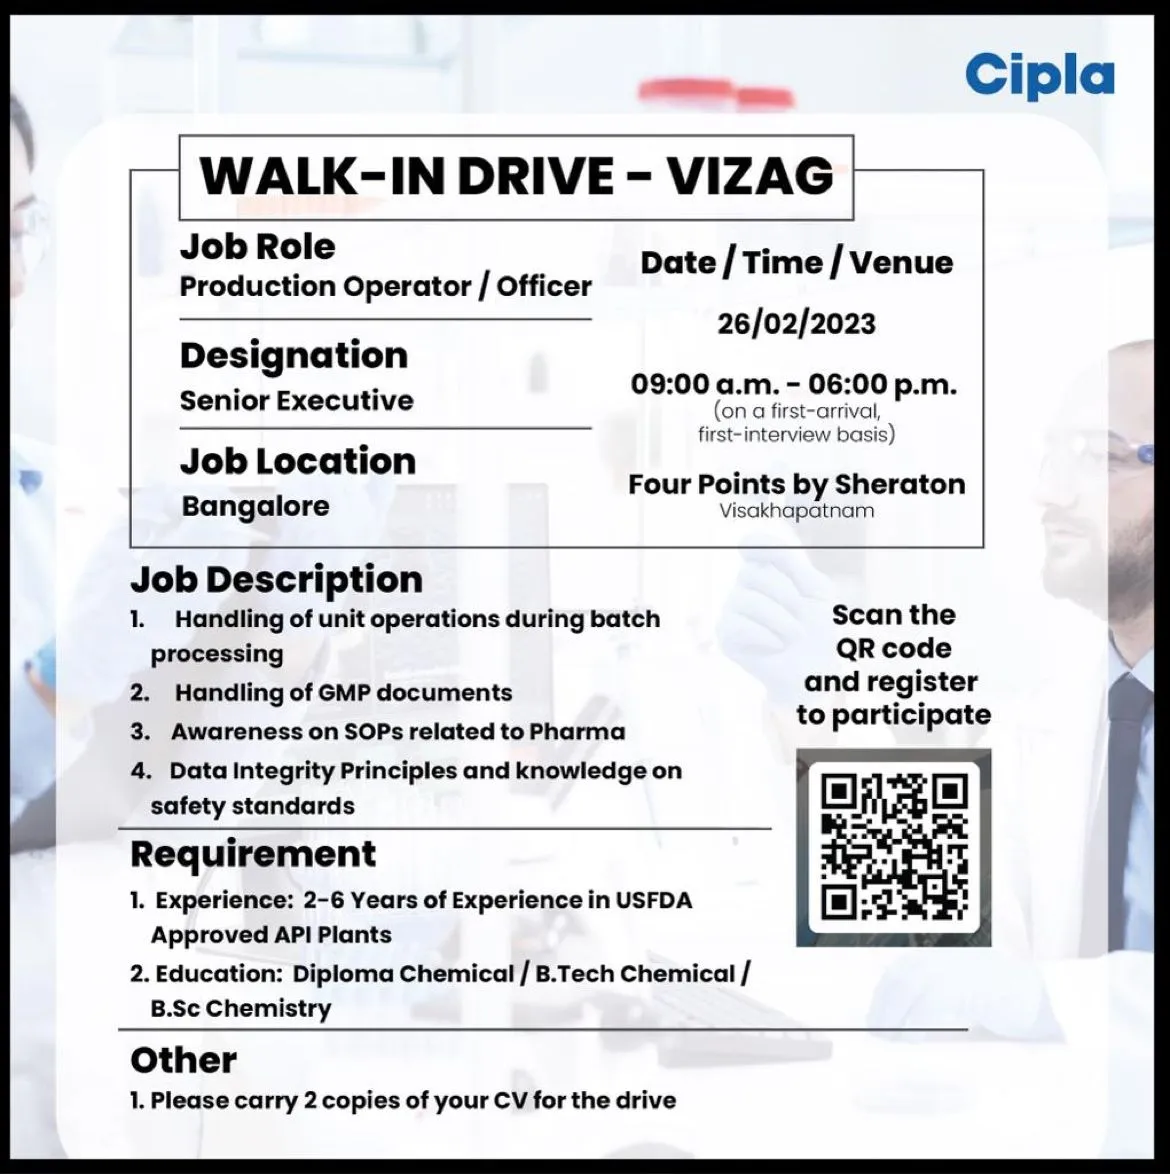 Career at Cipla - Vizag Walk-in Drive for production operators, officers 